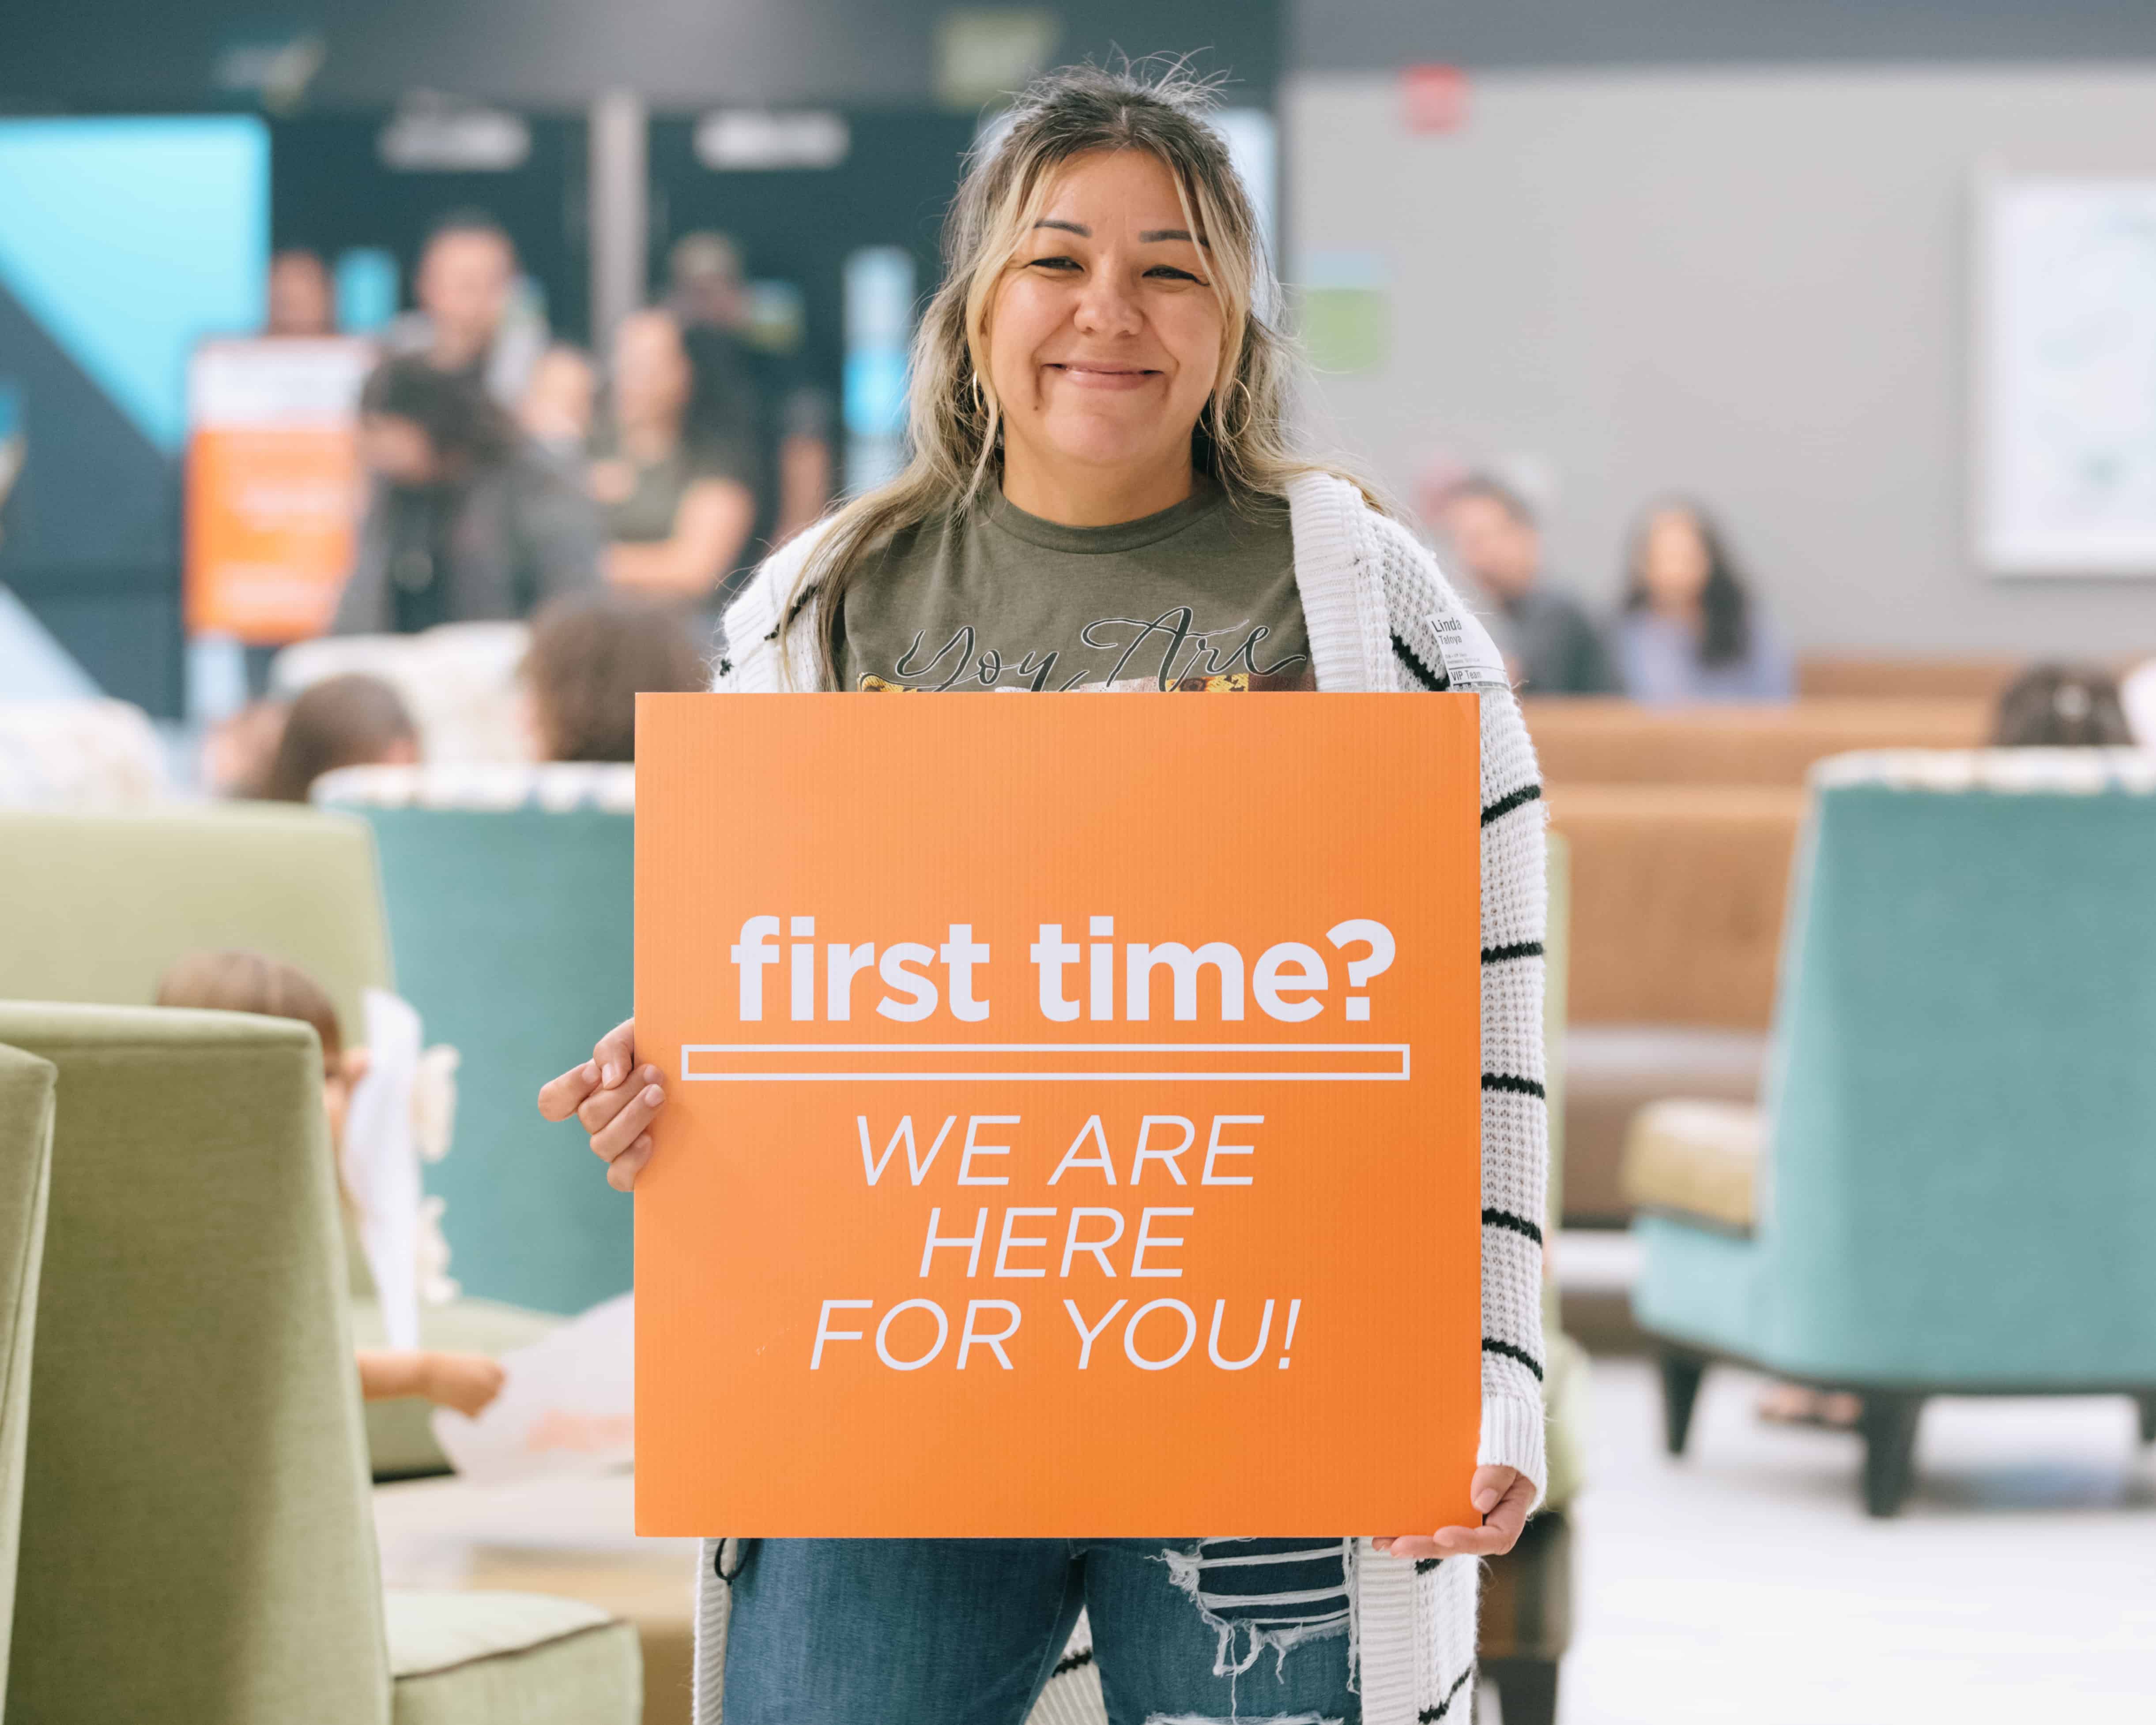 Smiling woman holding "first time?"poster